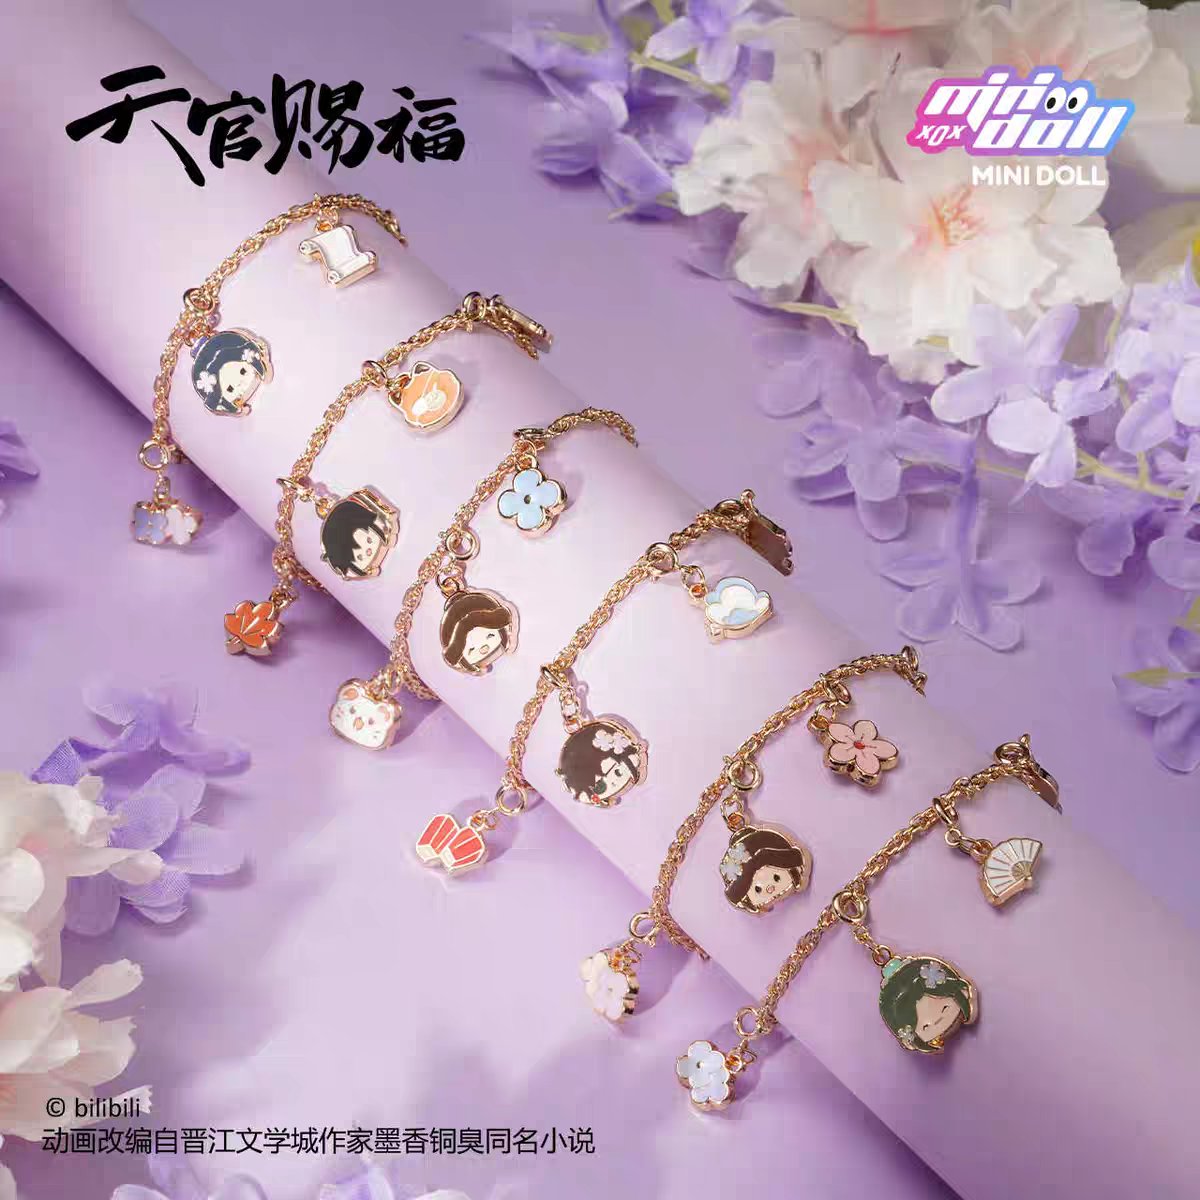 ⭐NEW!! MINIDOLL x TGCF Donghua 锦绣繁花 DIY blind box charm bracelets now have a placeholder listing!!⭐ Keep your eyeballs peeled for more info soon!! Blind single draws & full box will be available!! 📿💕 Link: m.tb.cn/h.gWVyVG0LFlPb…